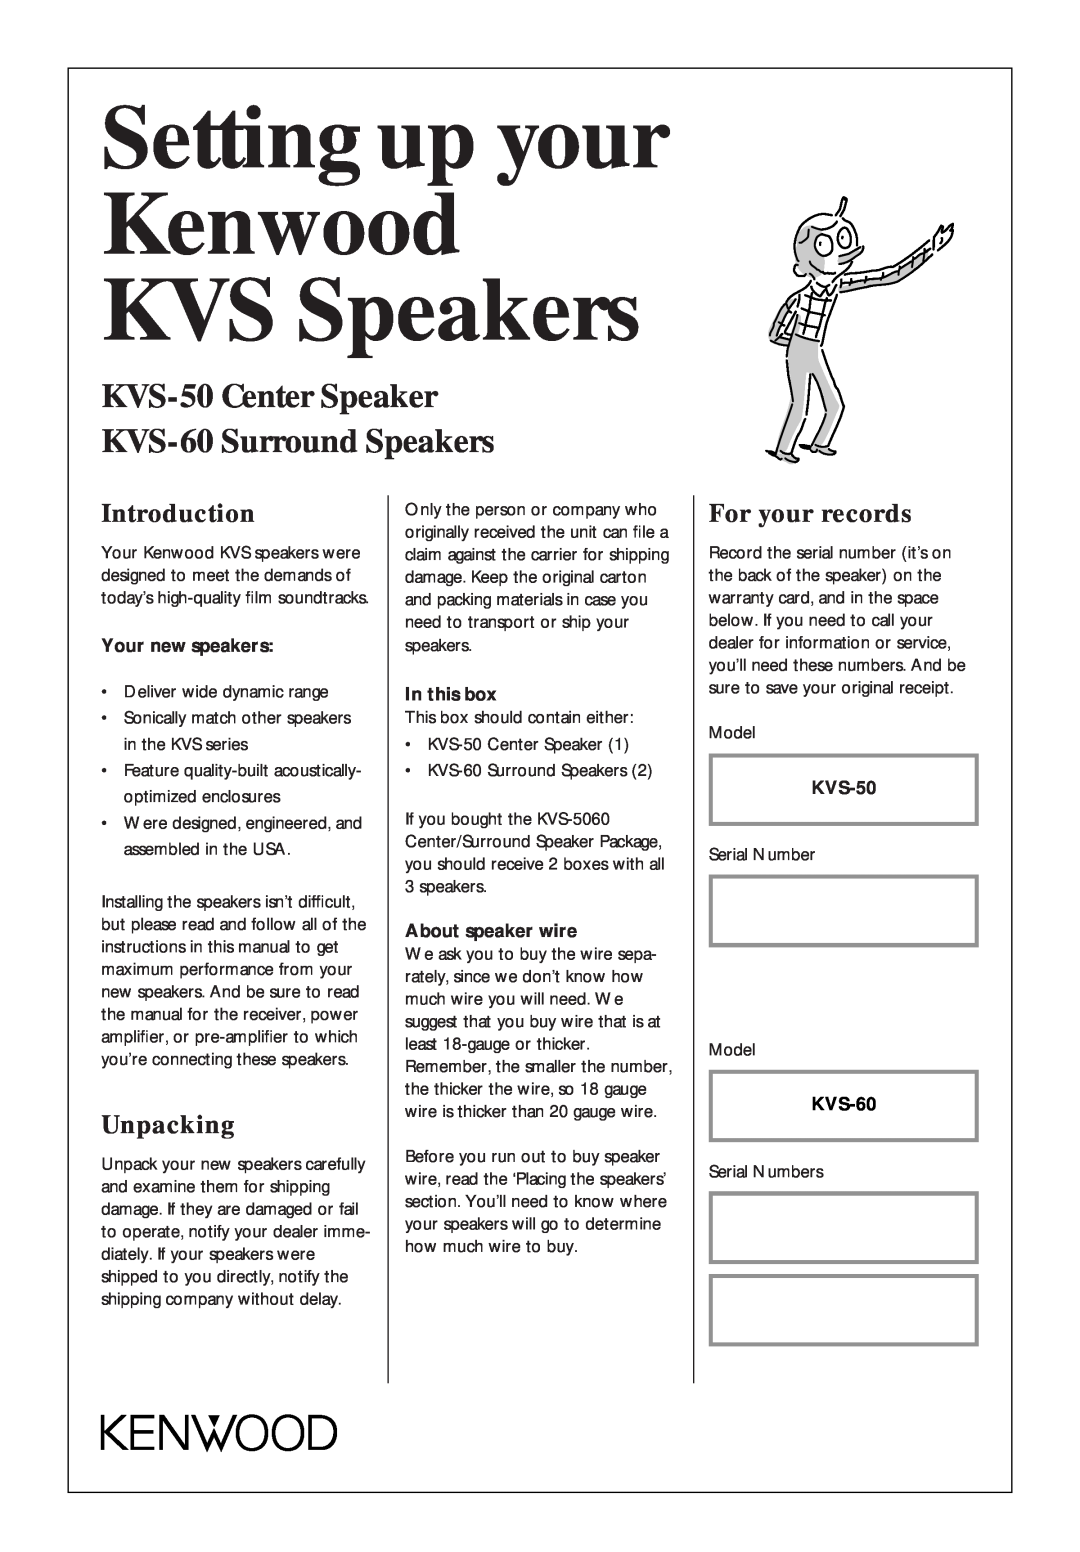 Kenwood KVS-50 warranty Setting up your Kenwood KVS Speakers, Introduction, Unpacking, For your records, Your new speakers 